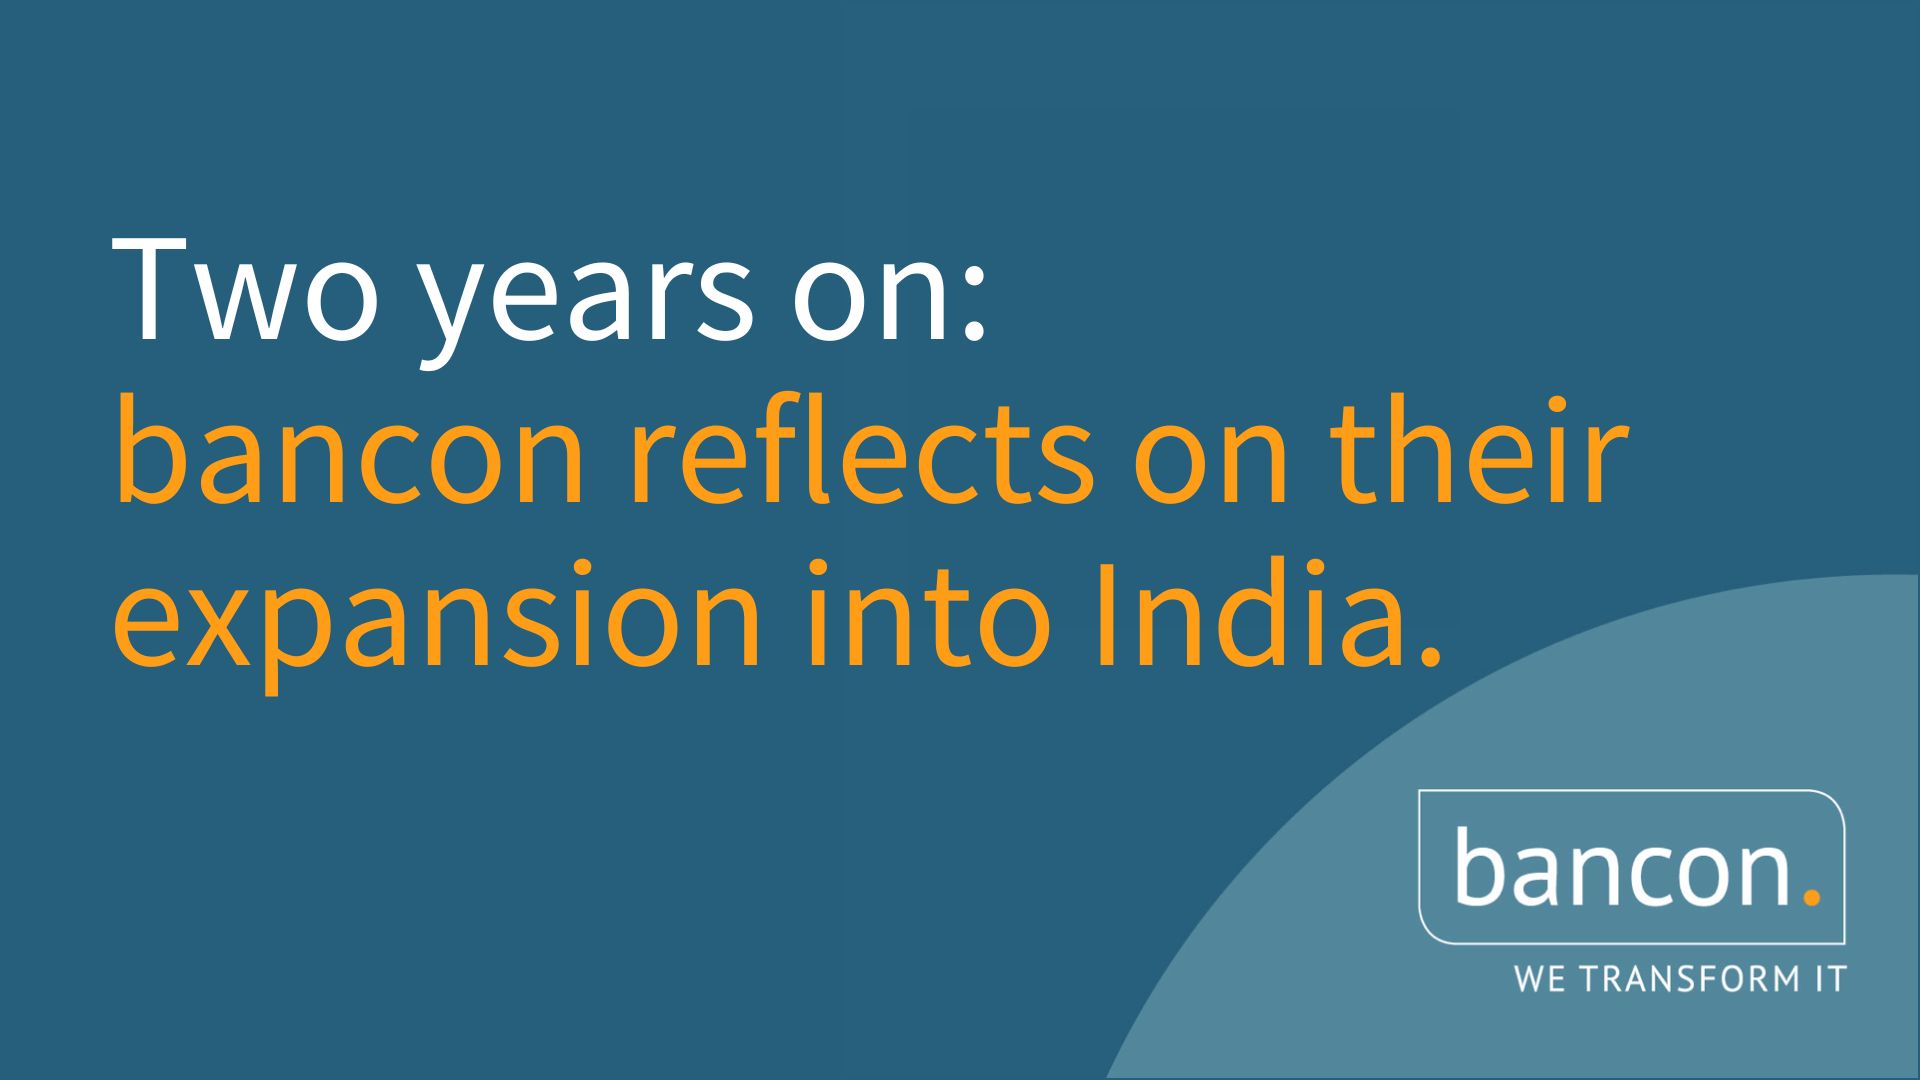 Two years on  - bancon reflects on their expansion into India